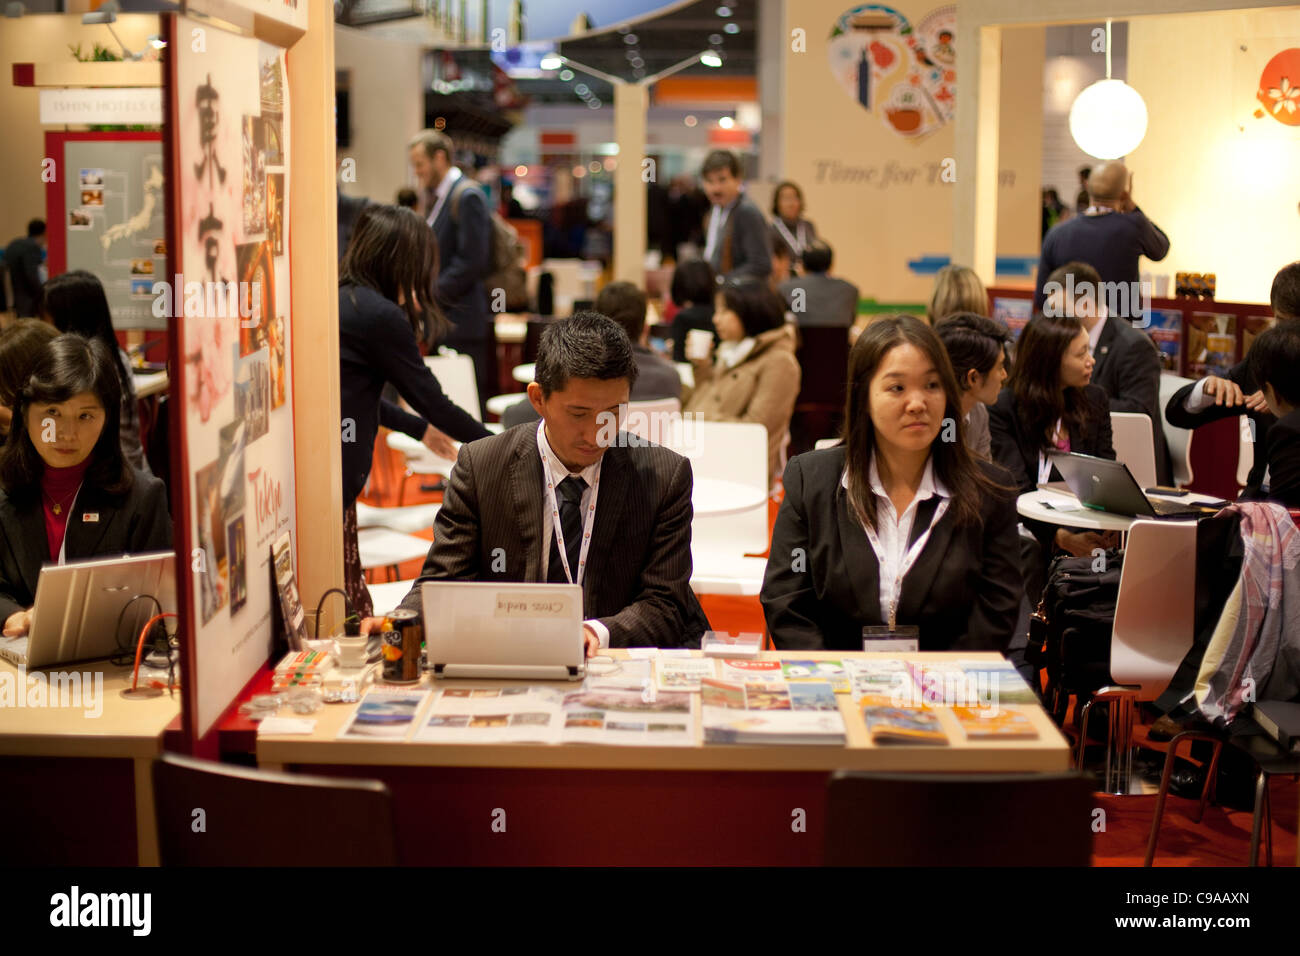 The world travel market exhibition in London Docklands Stock Photo